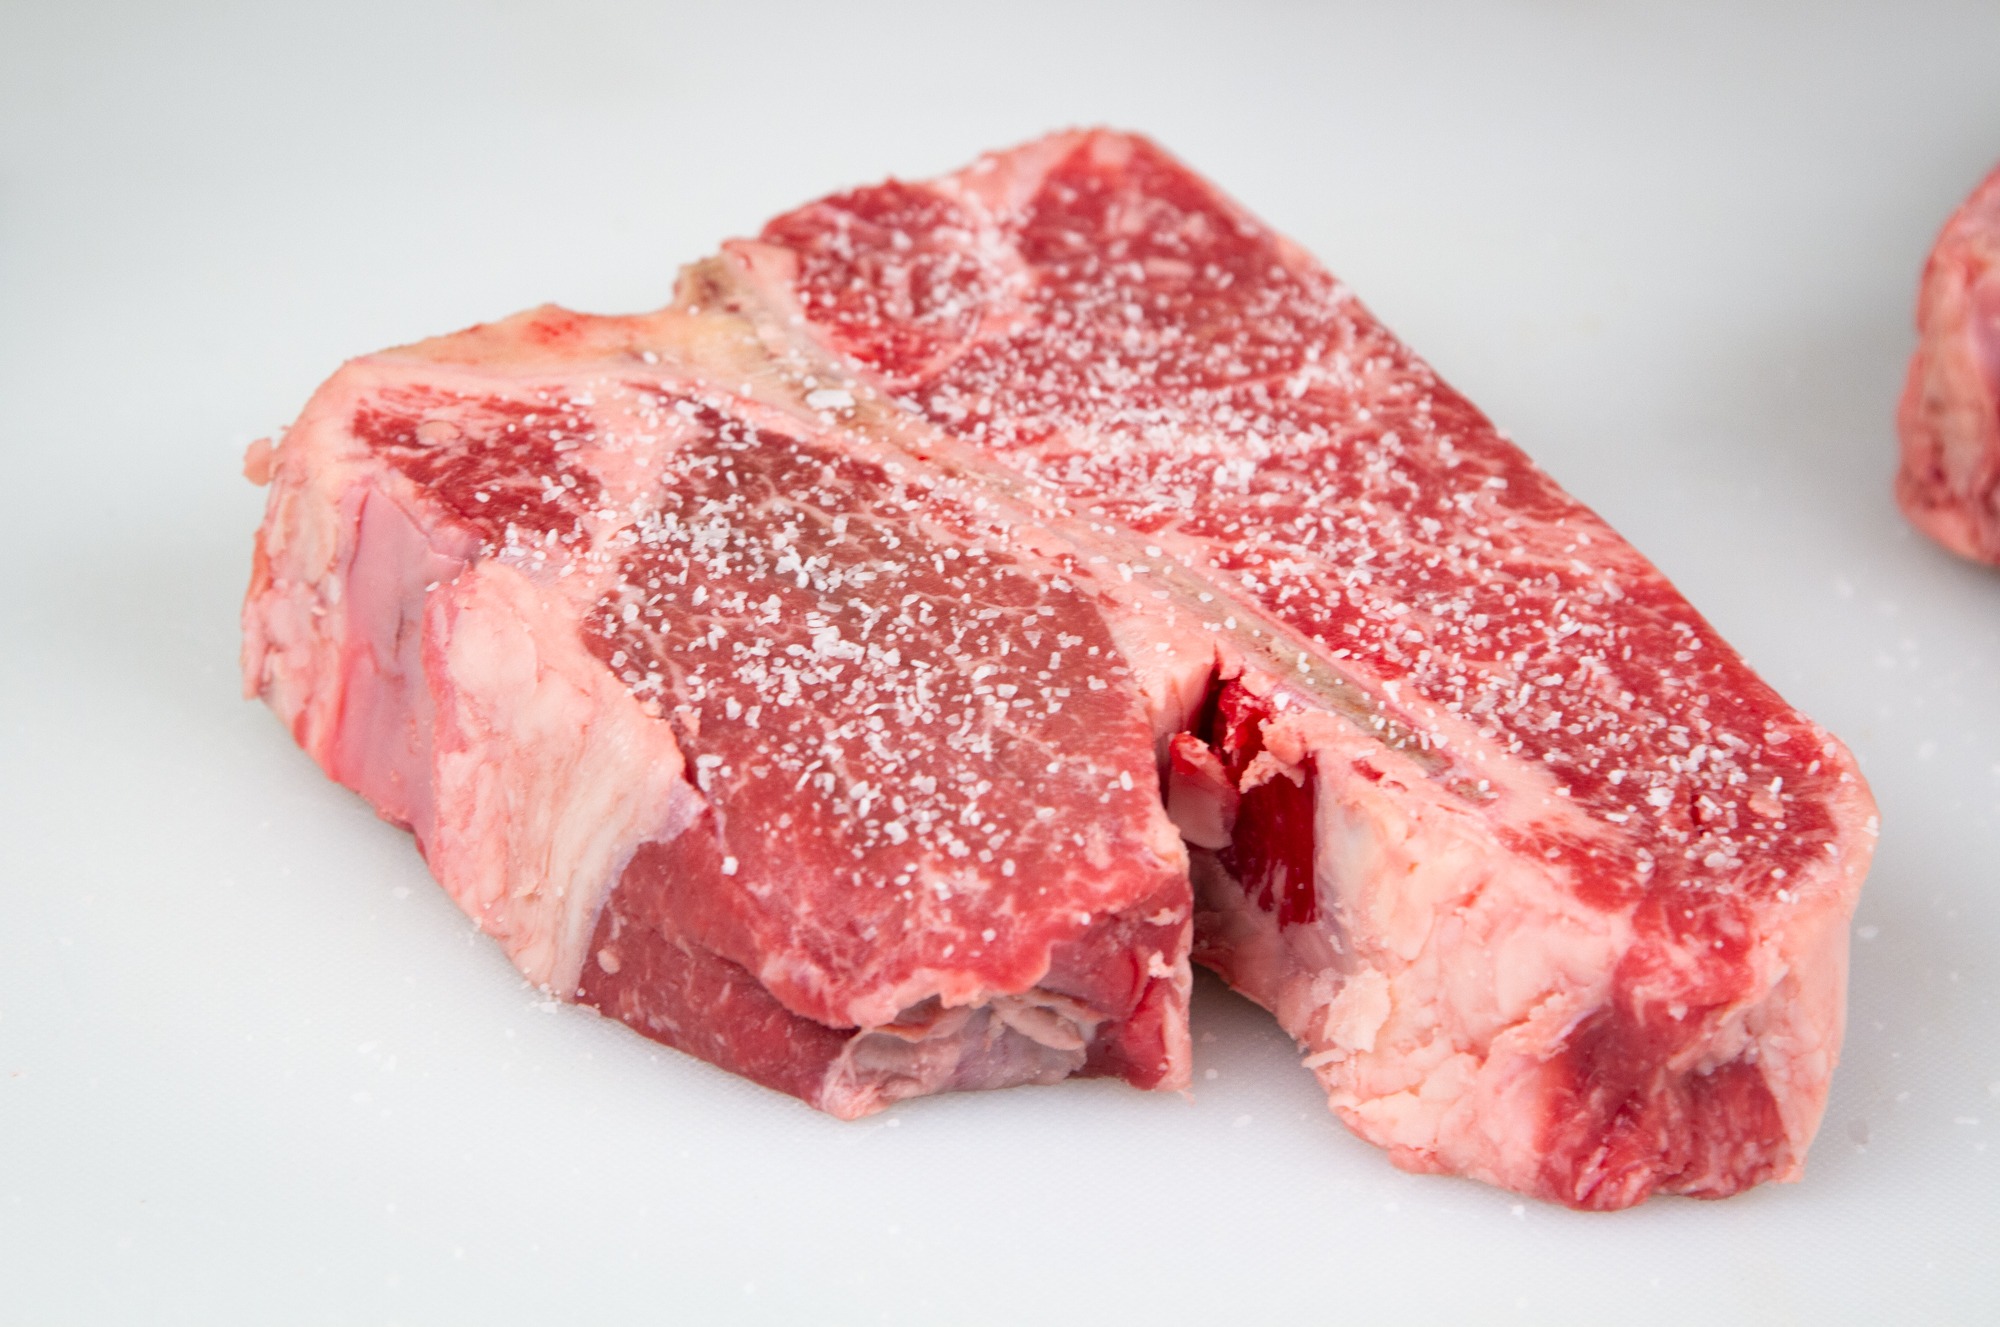 How to Temp a Steak: Getting it Right